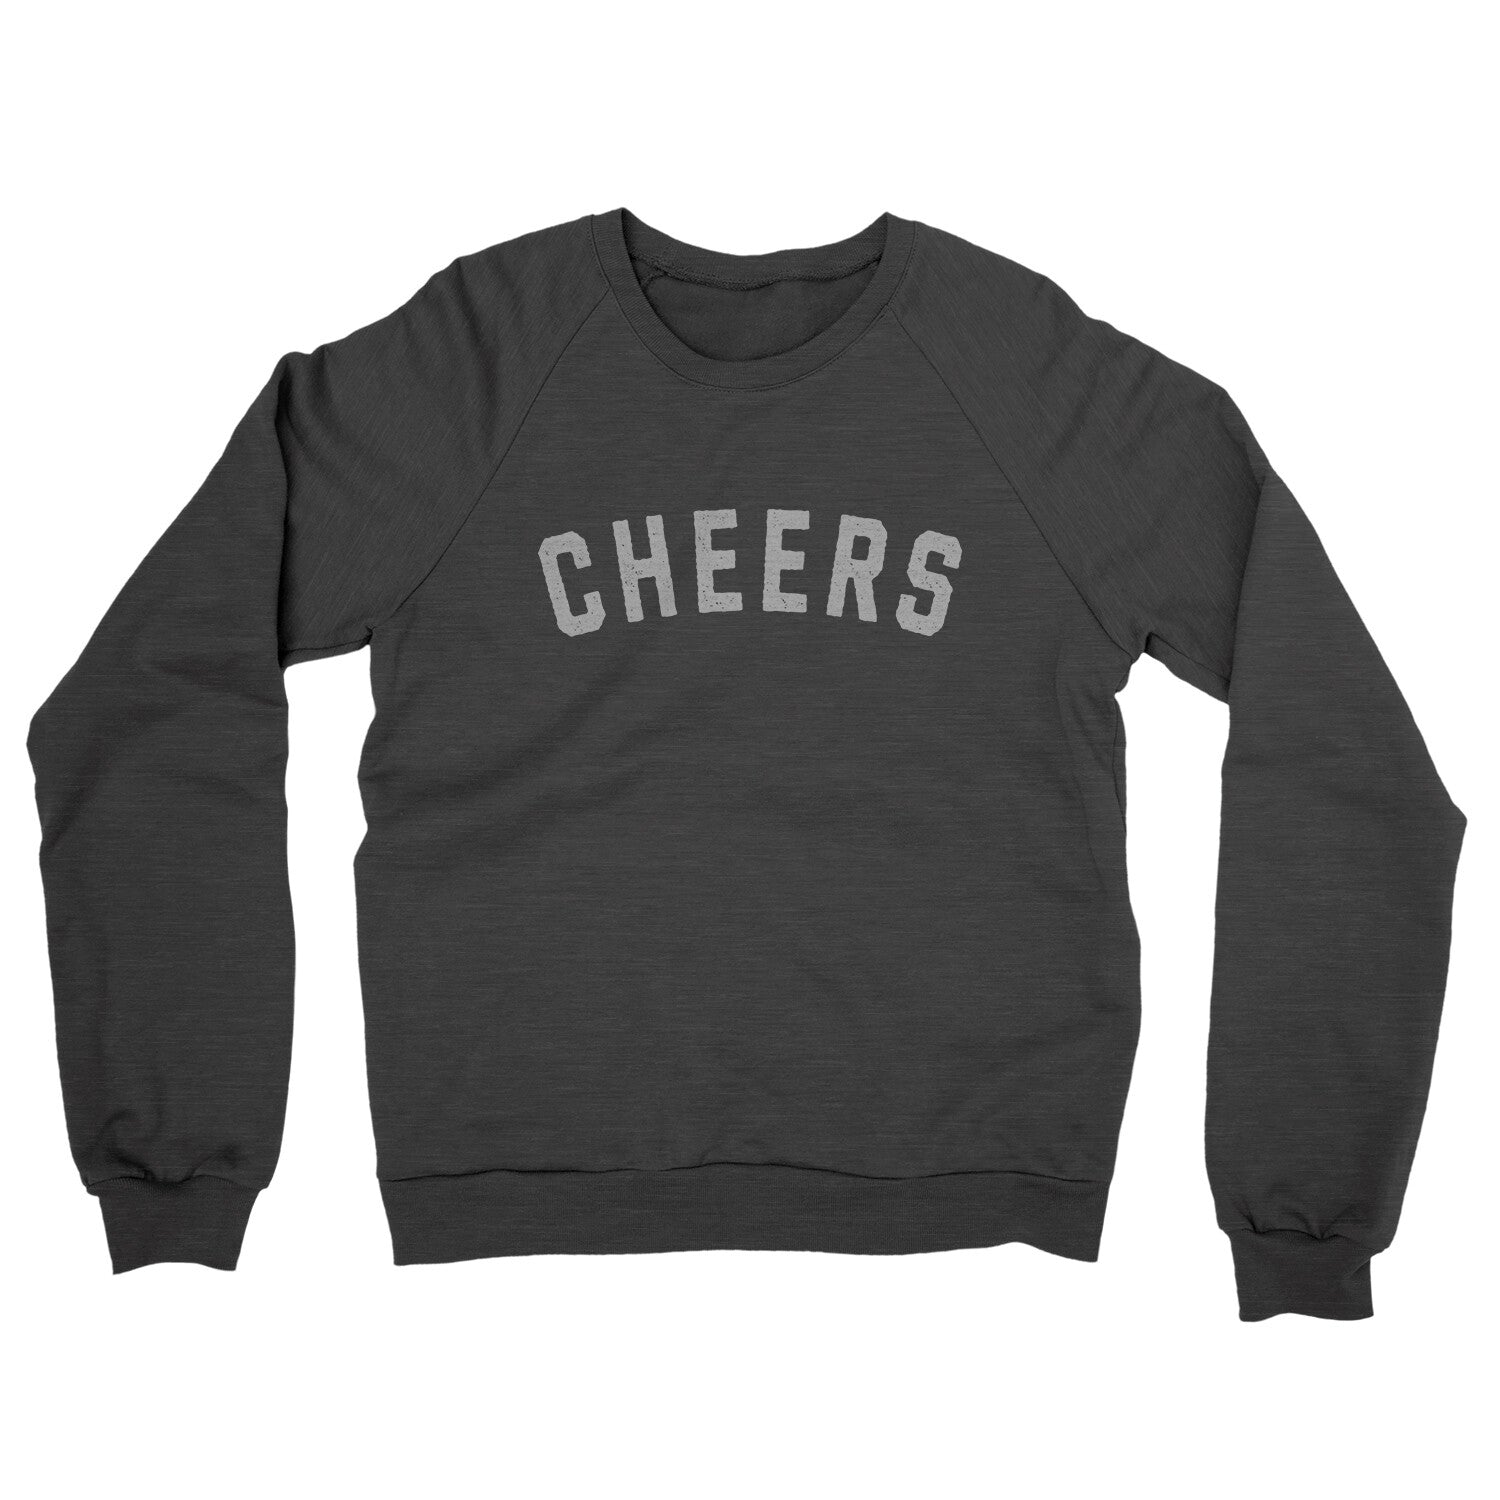 Cheers in Charcoal Heather Color